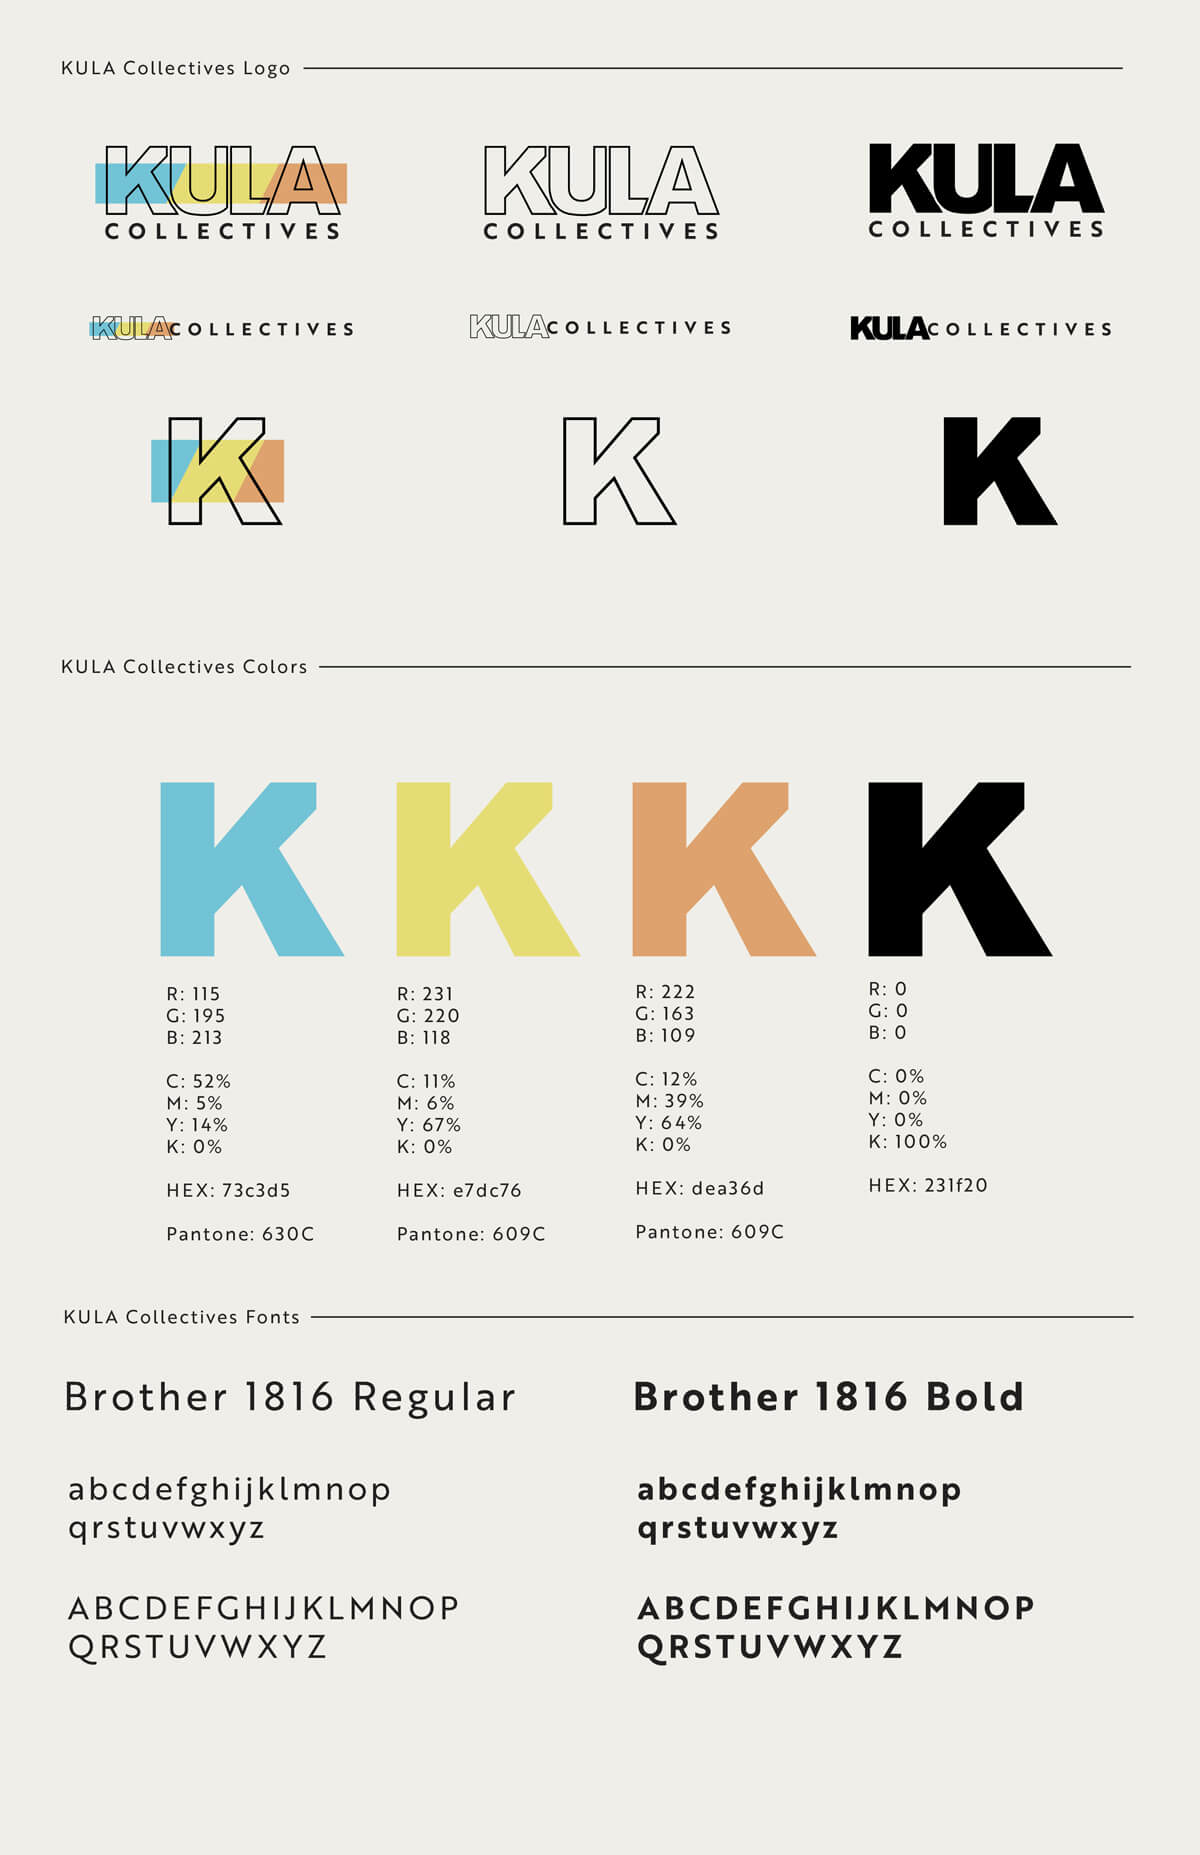 Kula Collective logo system and brand sheet by Stellen Design Branding Agency in Los Angeles CA showing how logos work as a system and not just by themselves